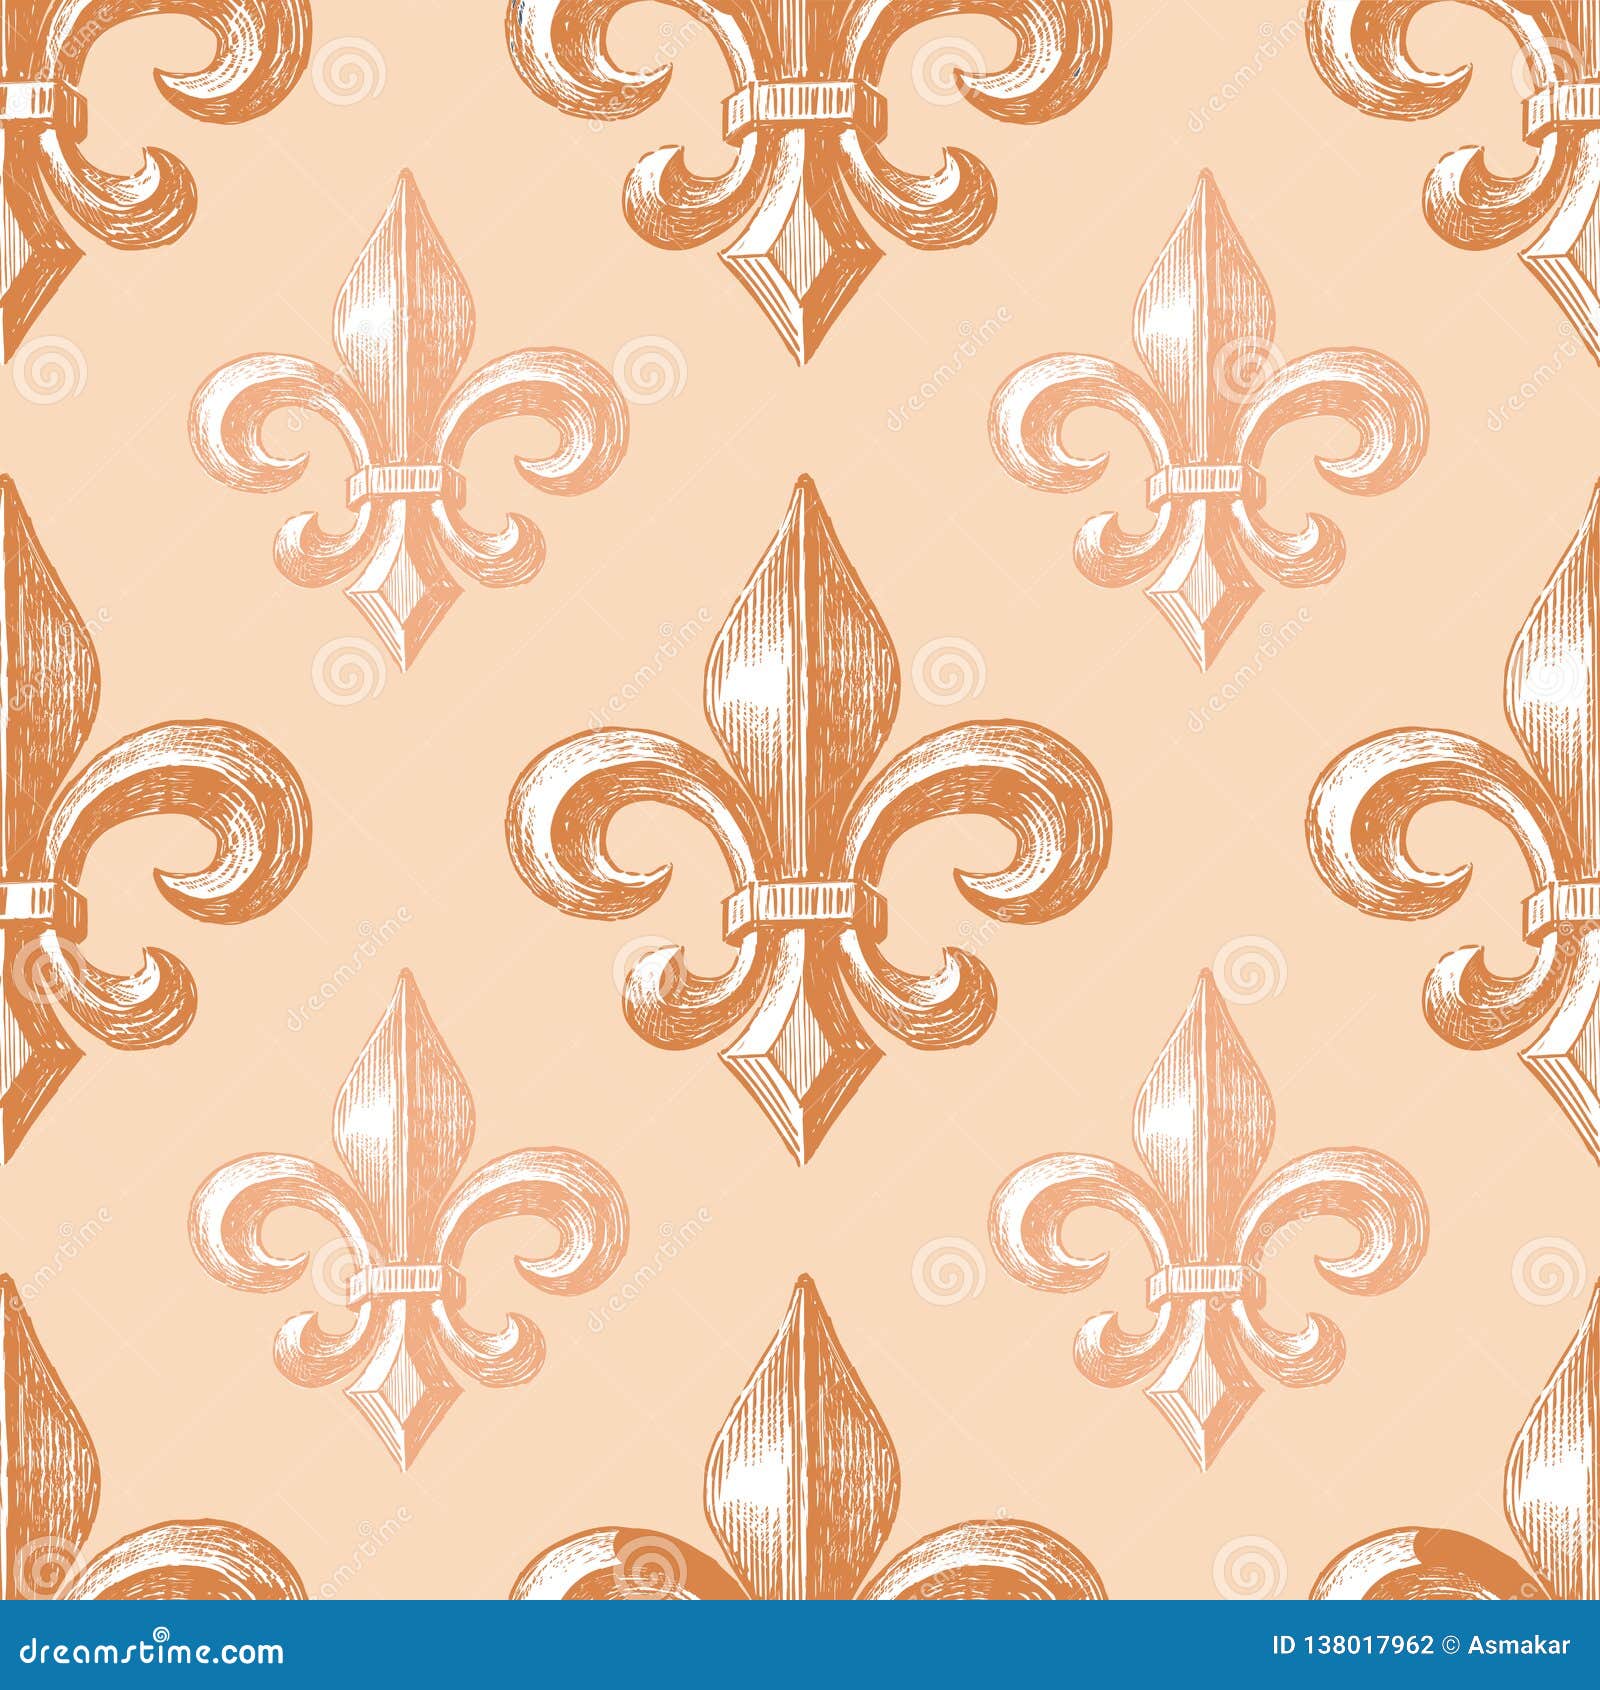 Seamless Pattern Of The Medieval French Lilies Stock Vector Illustration Of Graphic Decorative 138017962